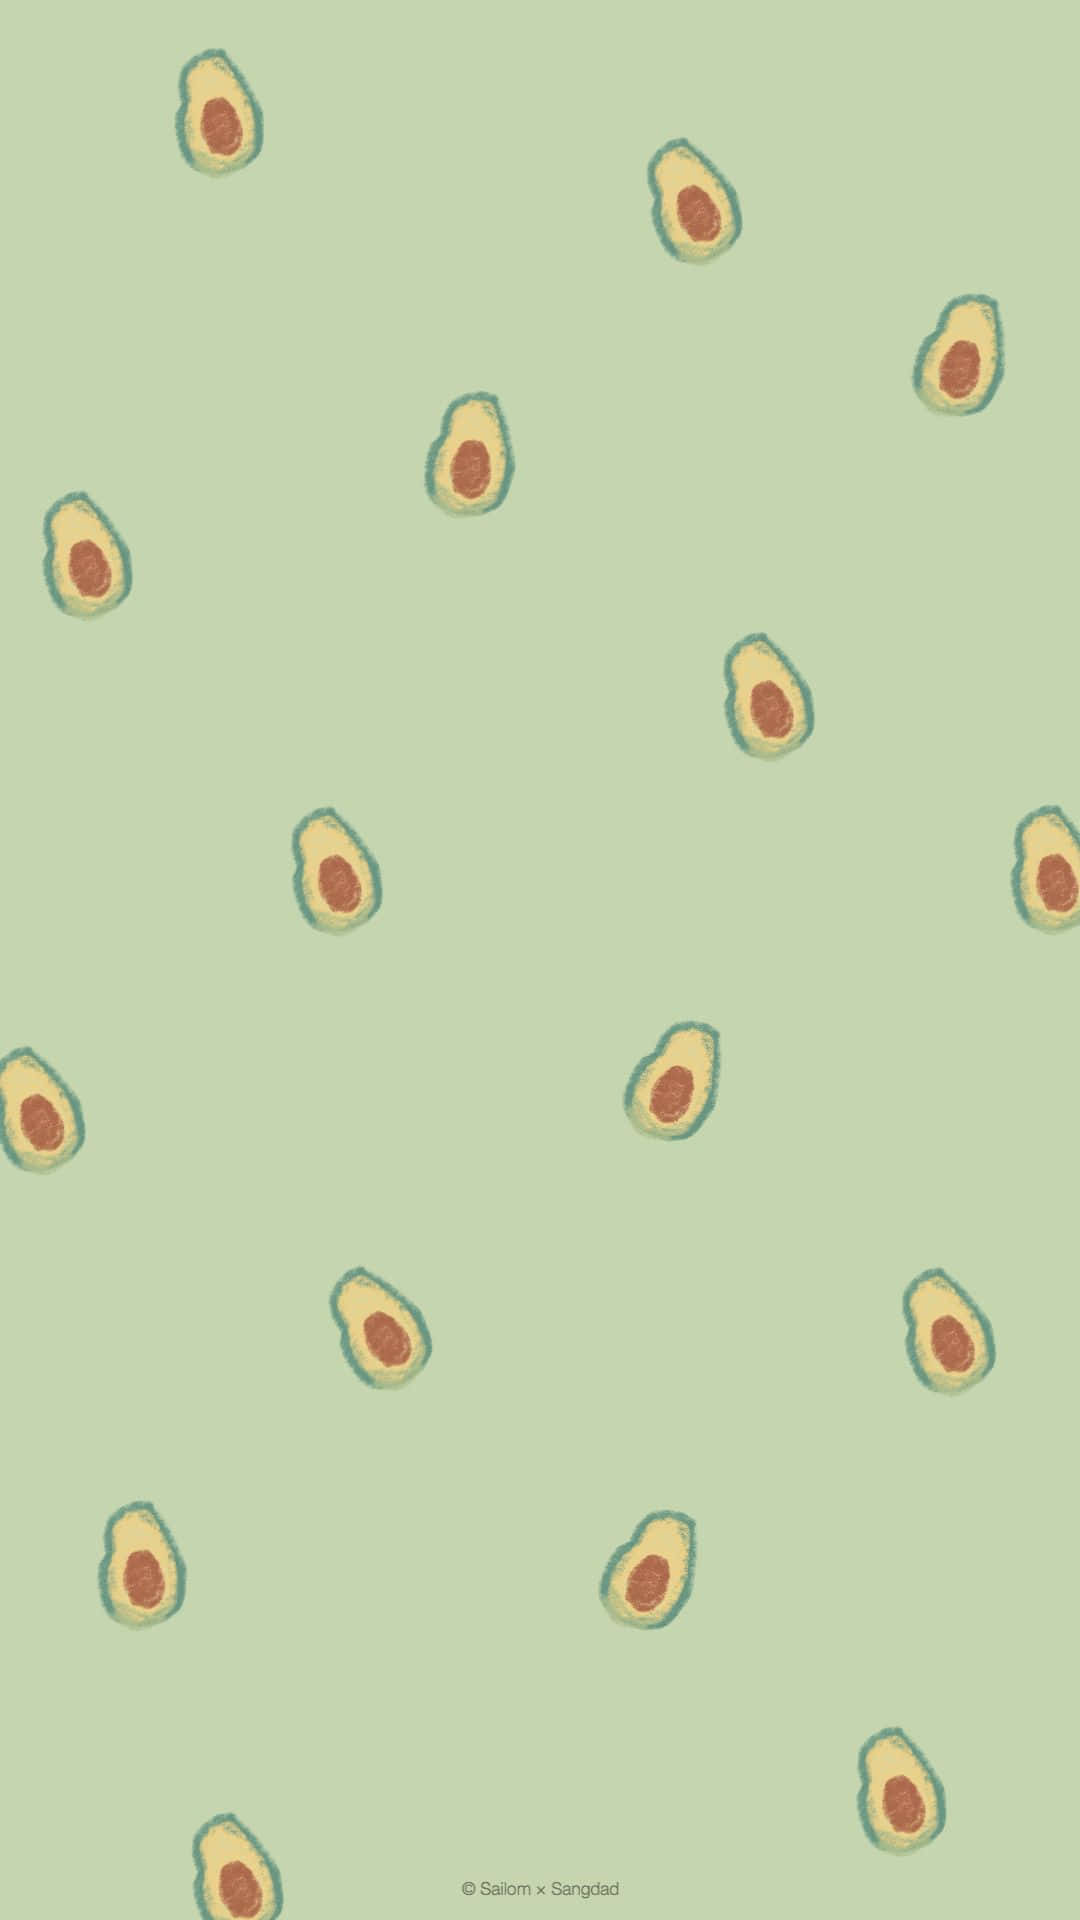 Make a statement with Avocado Iphone Wallpaper